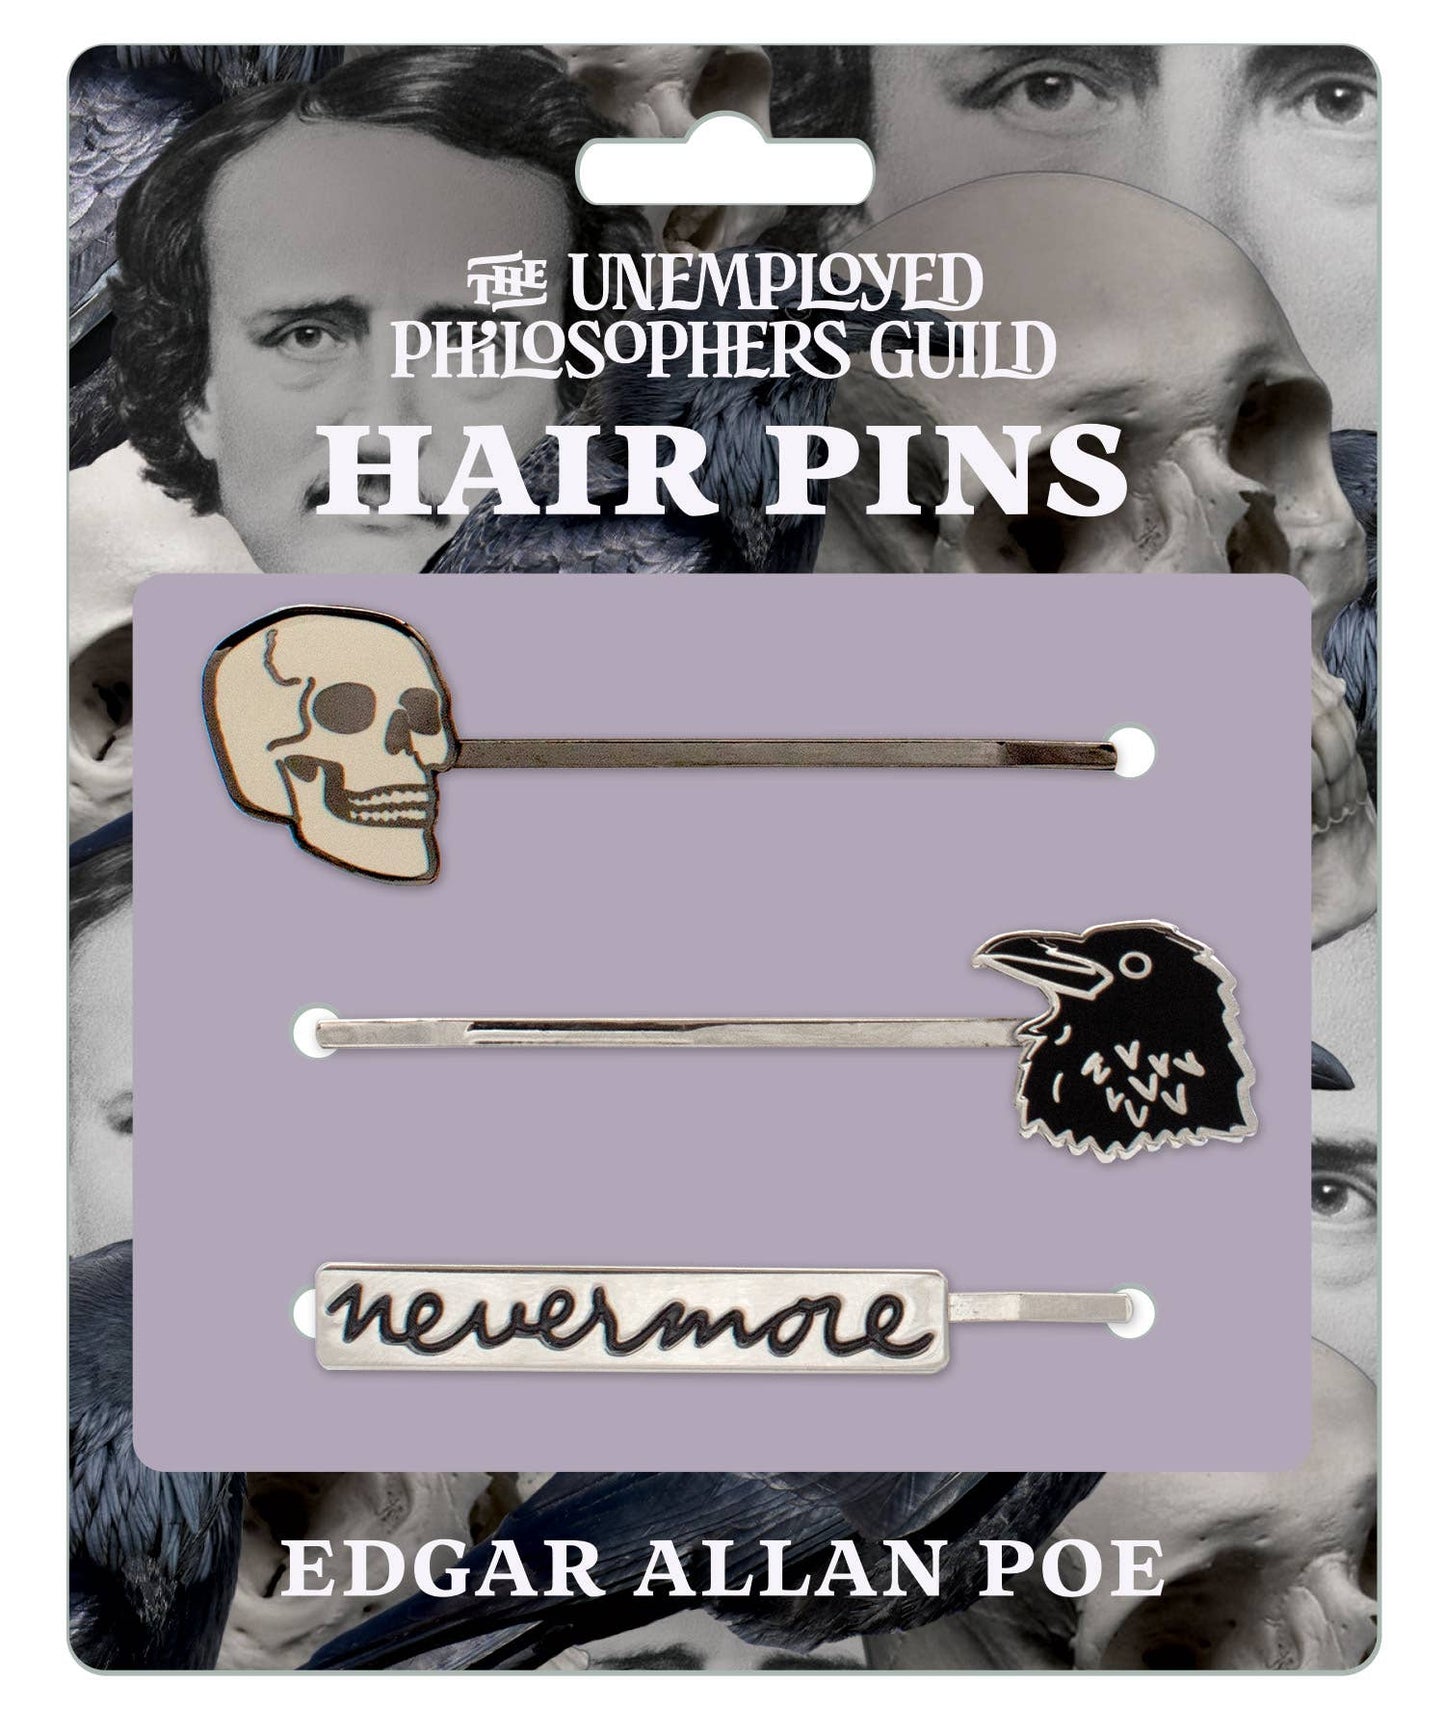 Edgar Allan Poe Hair Pins from Unemployed Philosophers Guild